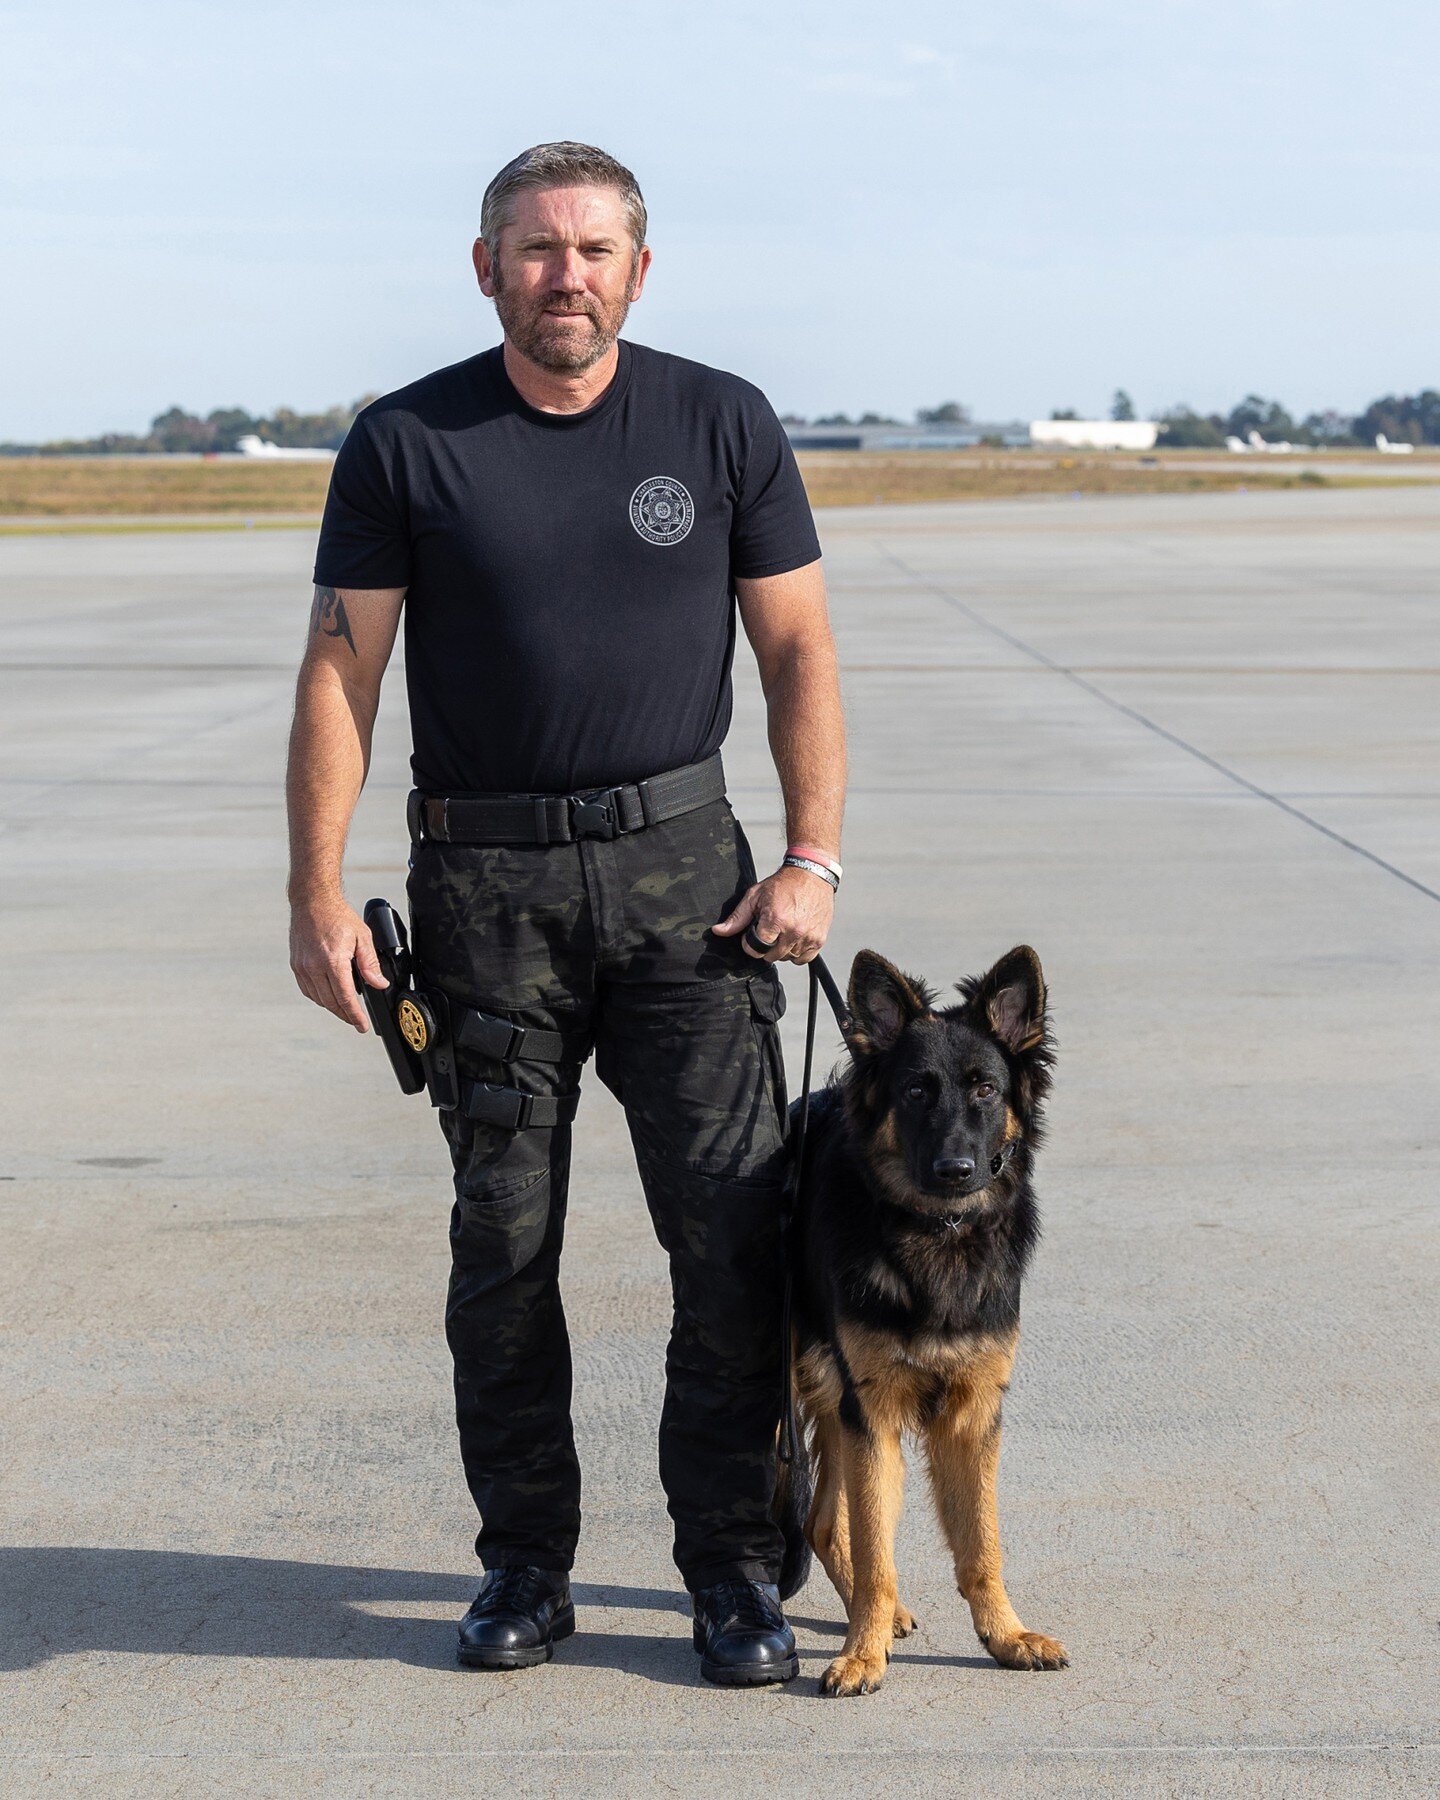 Happy New Year 2024! You all know of my great love of Good Dogs of Service. Here are some of my favorites from portraits of our very own Charleston Airport K9 PD Unit &amp; IPWDA Nationals 2023 here in Charleston. This is how they train...

Looking f